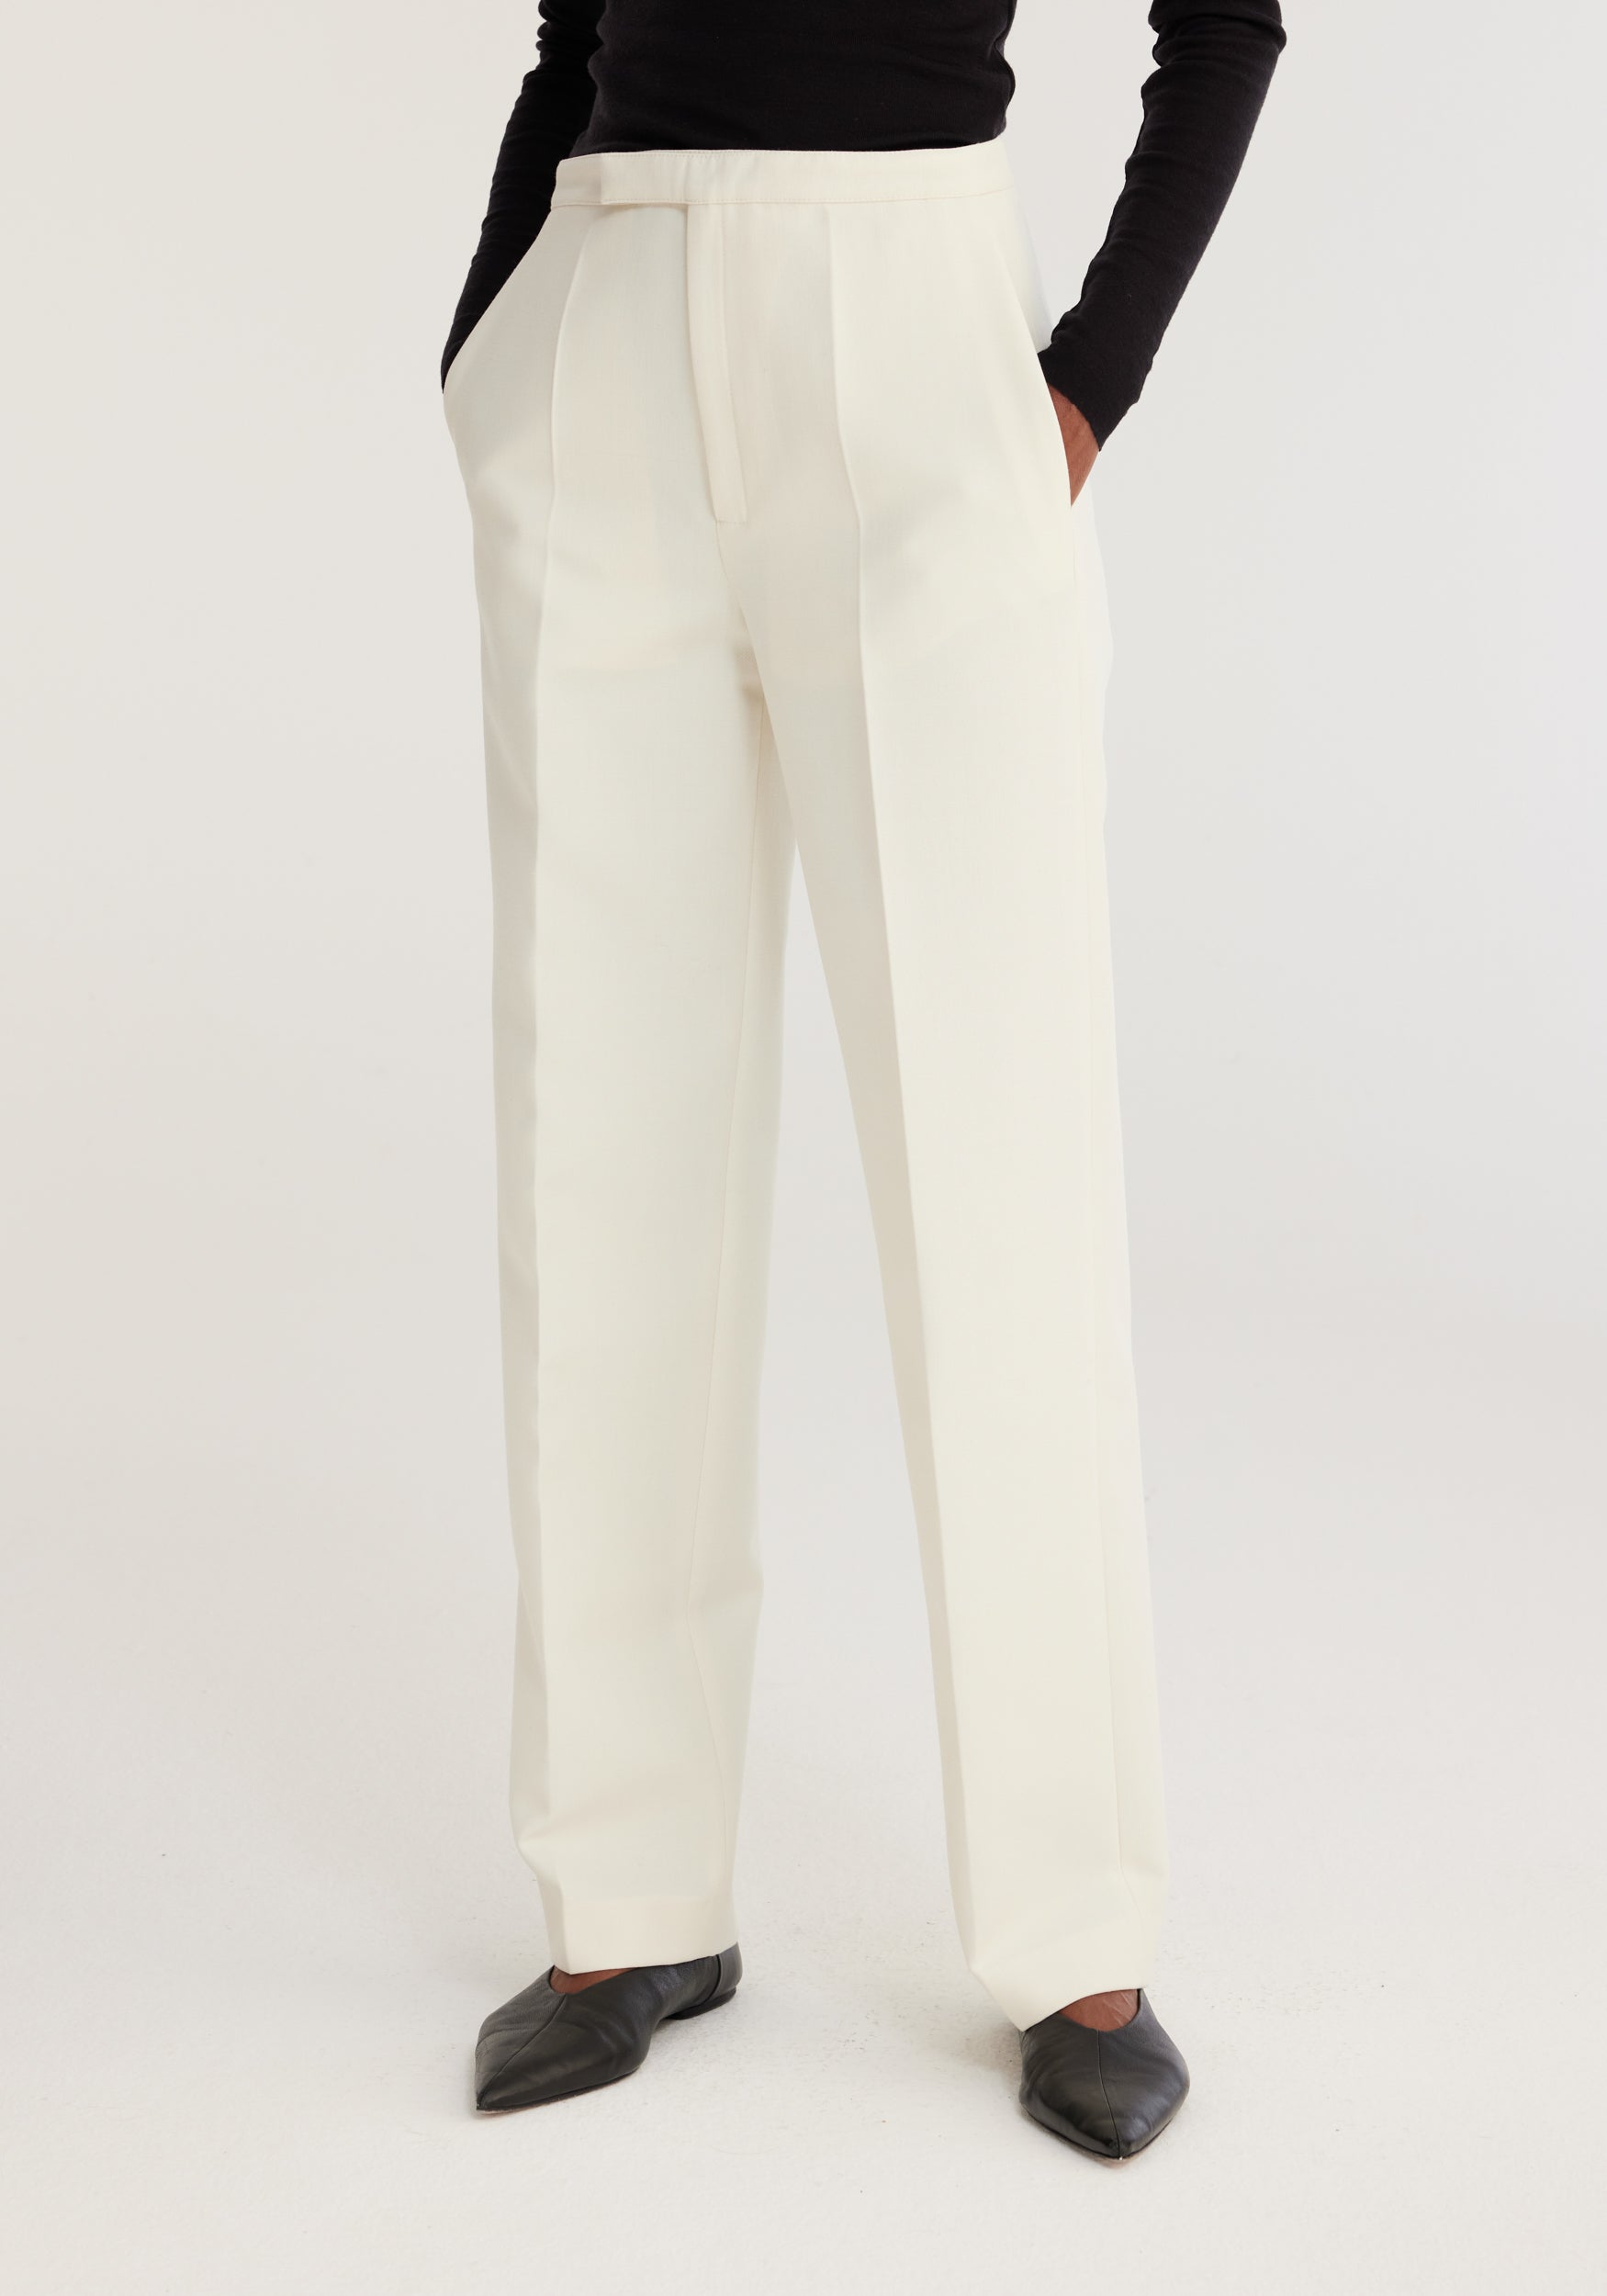 The Rohe Tailored Wool Trousers in Ivory available at The New Trend Australia